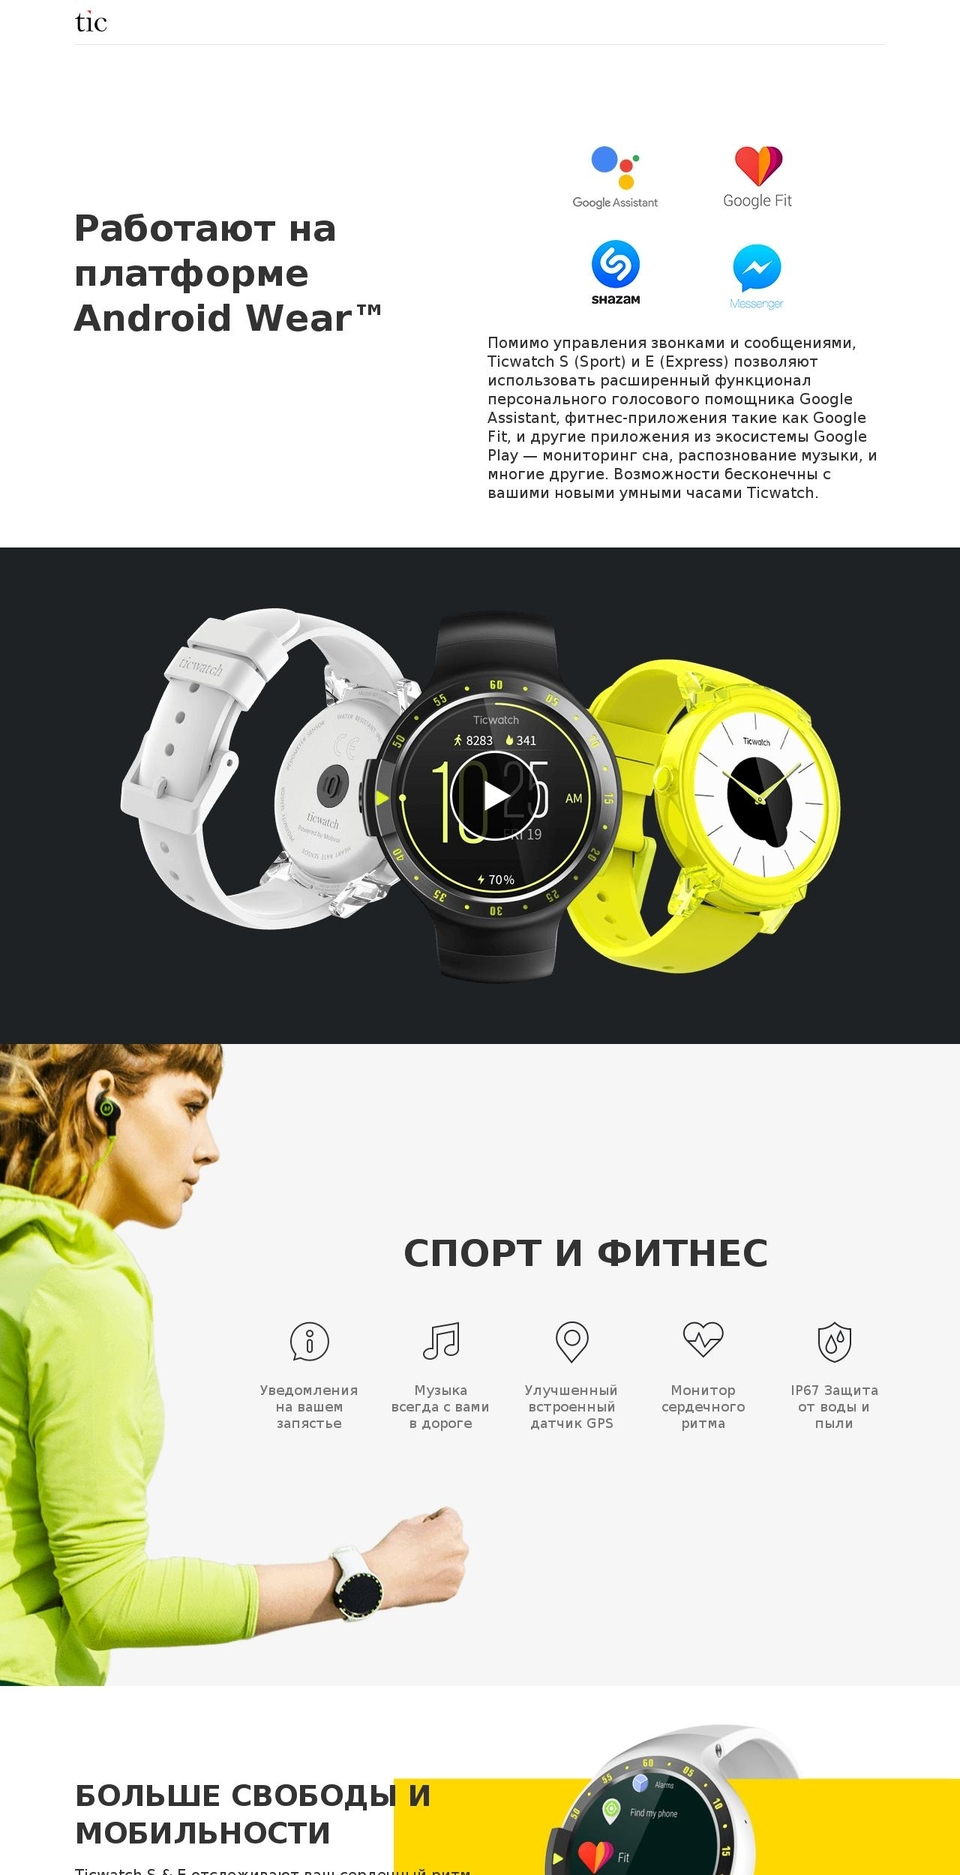 update of theme-20170818 Shopify theme site example ticwatch.ru